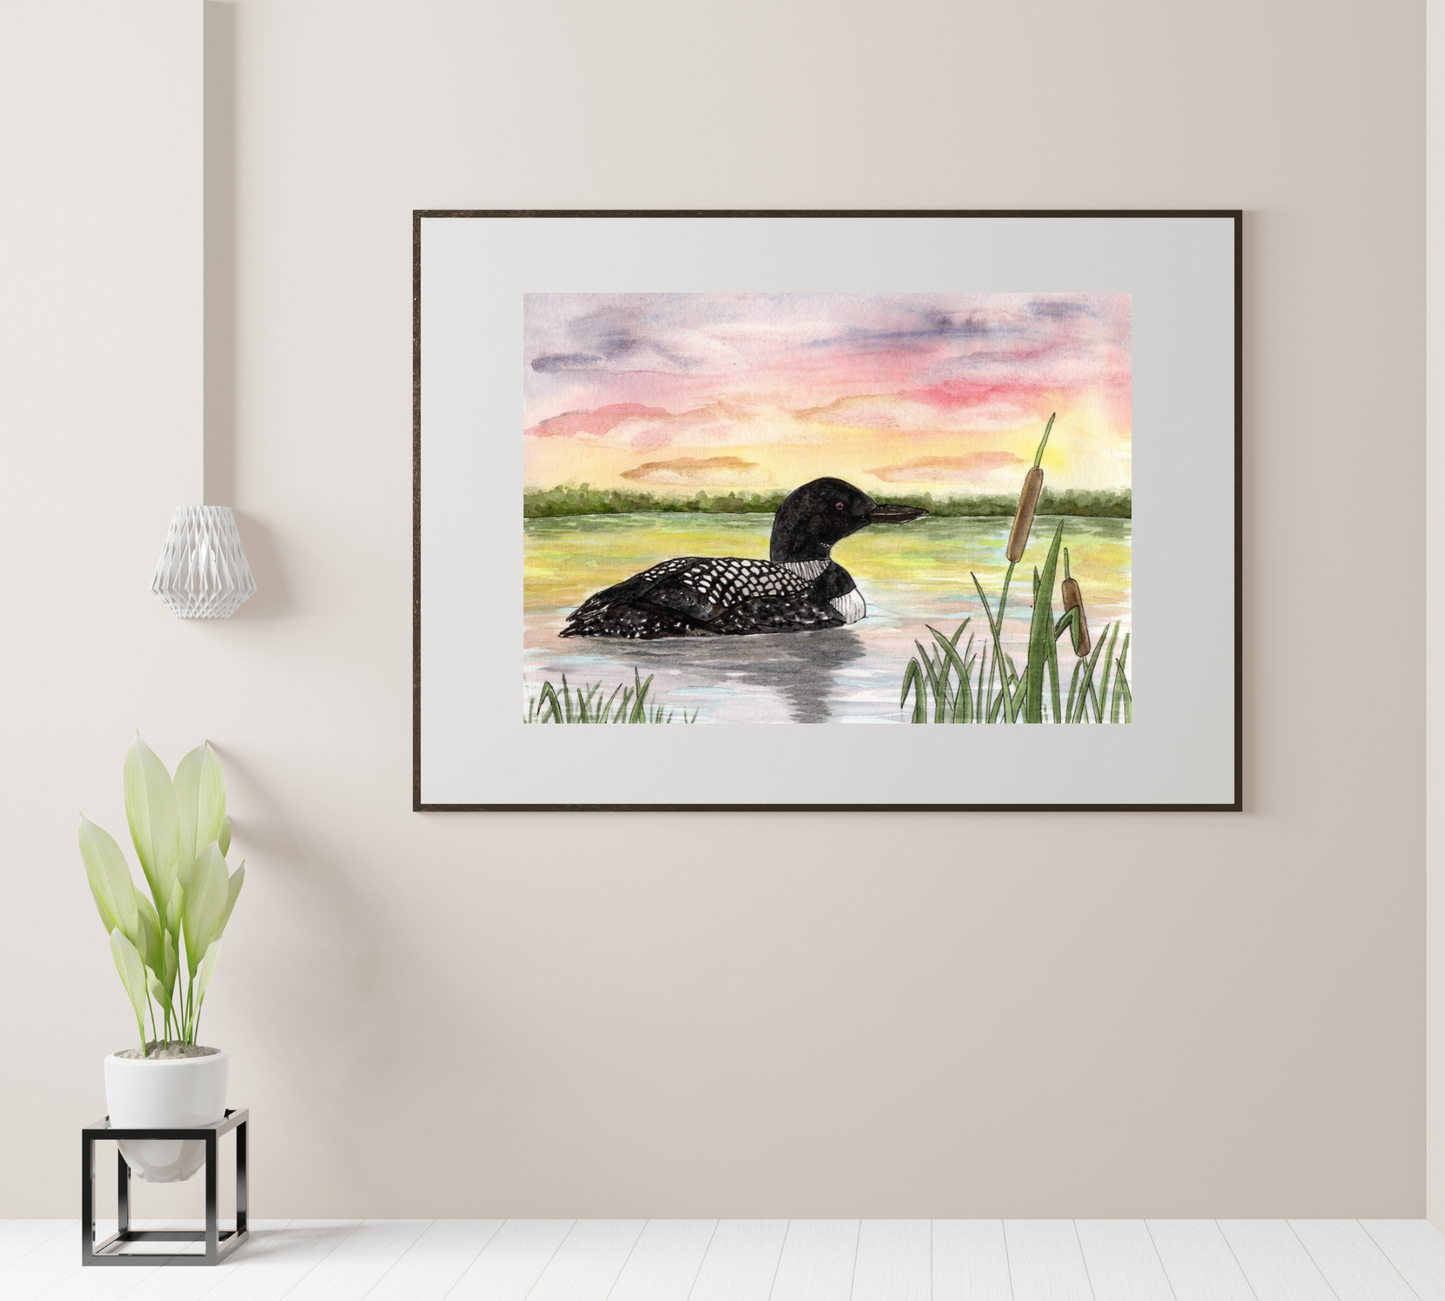 Loon at Sunset - Pen and Watercolor Painting - Archival Quality Art Print